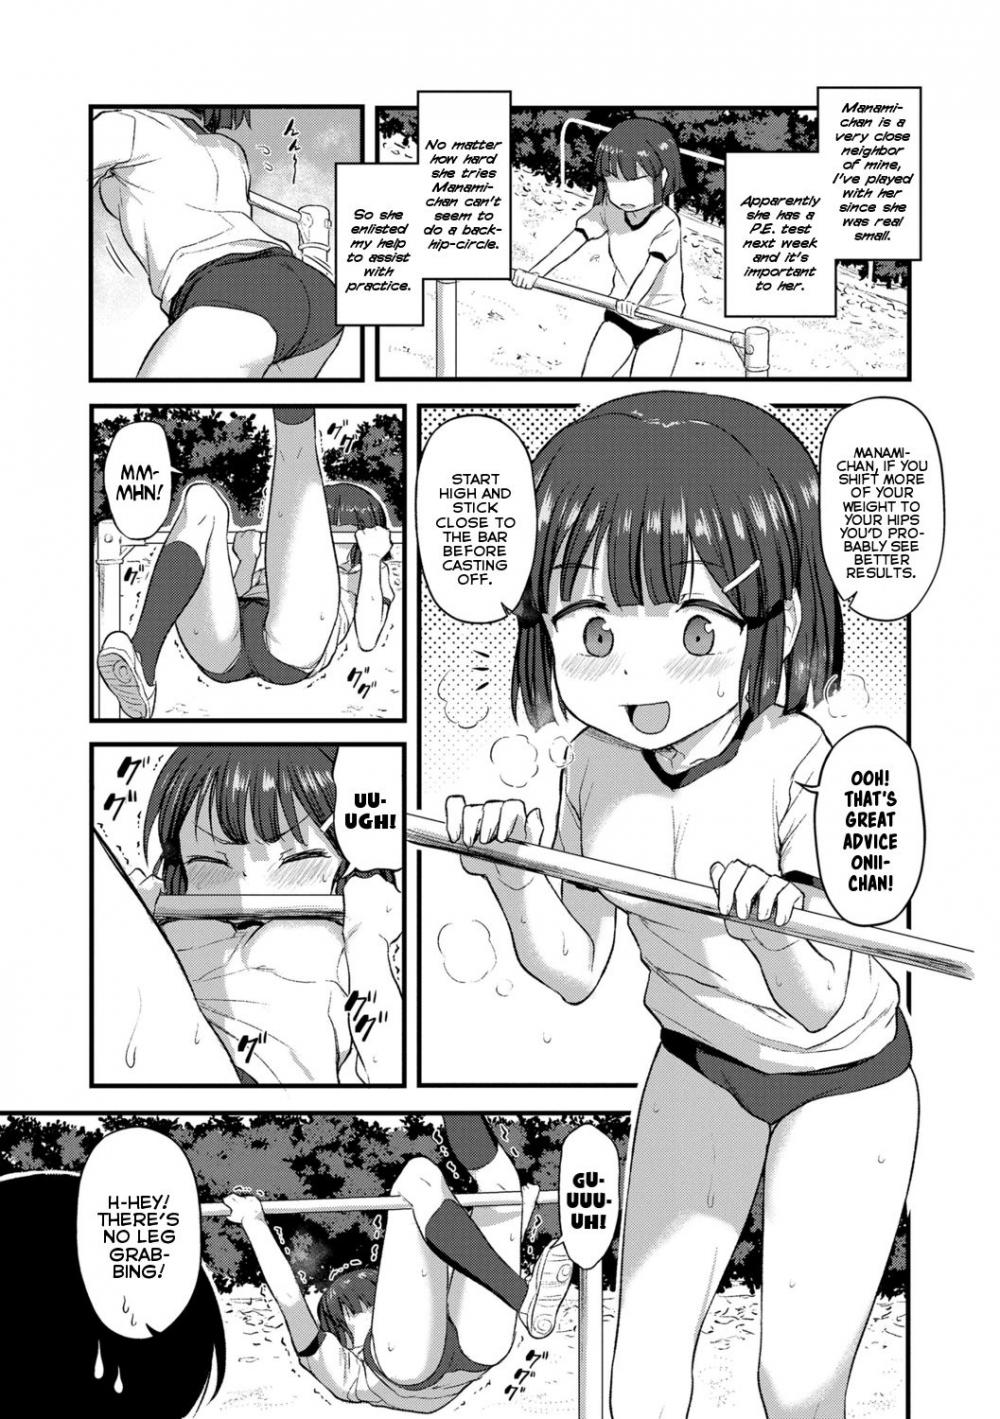 Hentai Manga Comic-What Kind of Weirdo Onii-chan Gets Excited From Seeing His Little Sister Naked?-Chapter 4-2